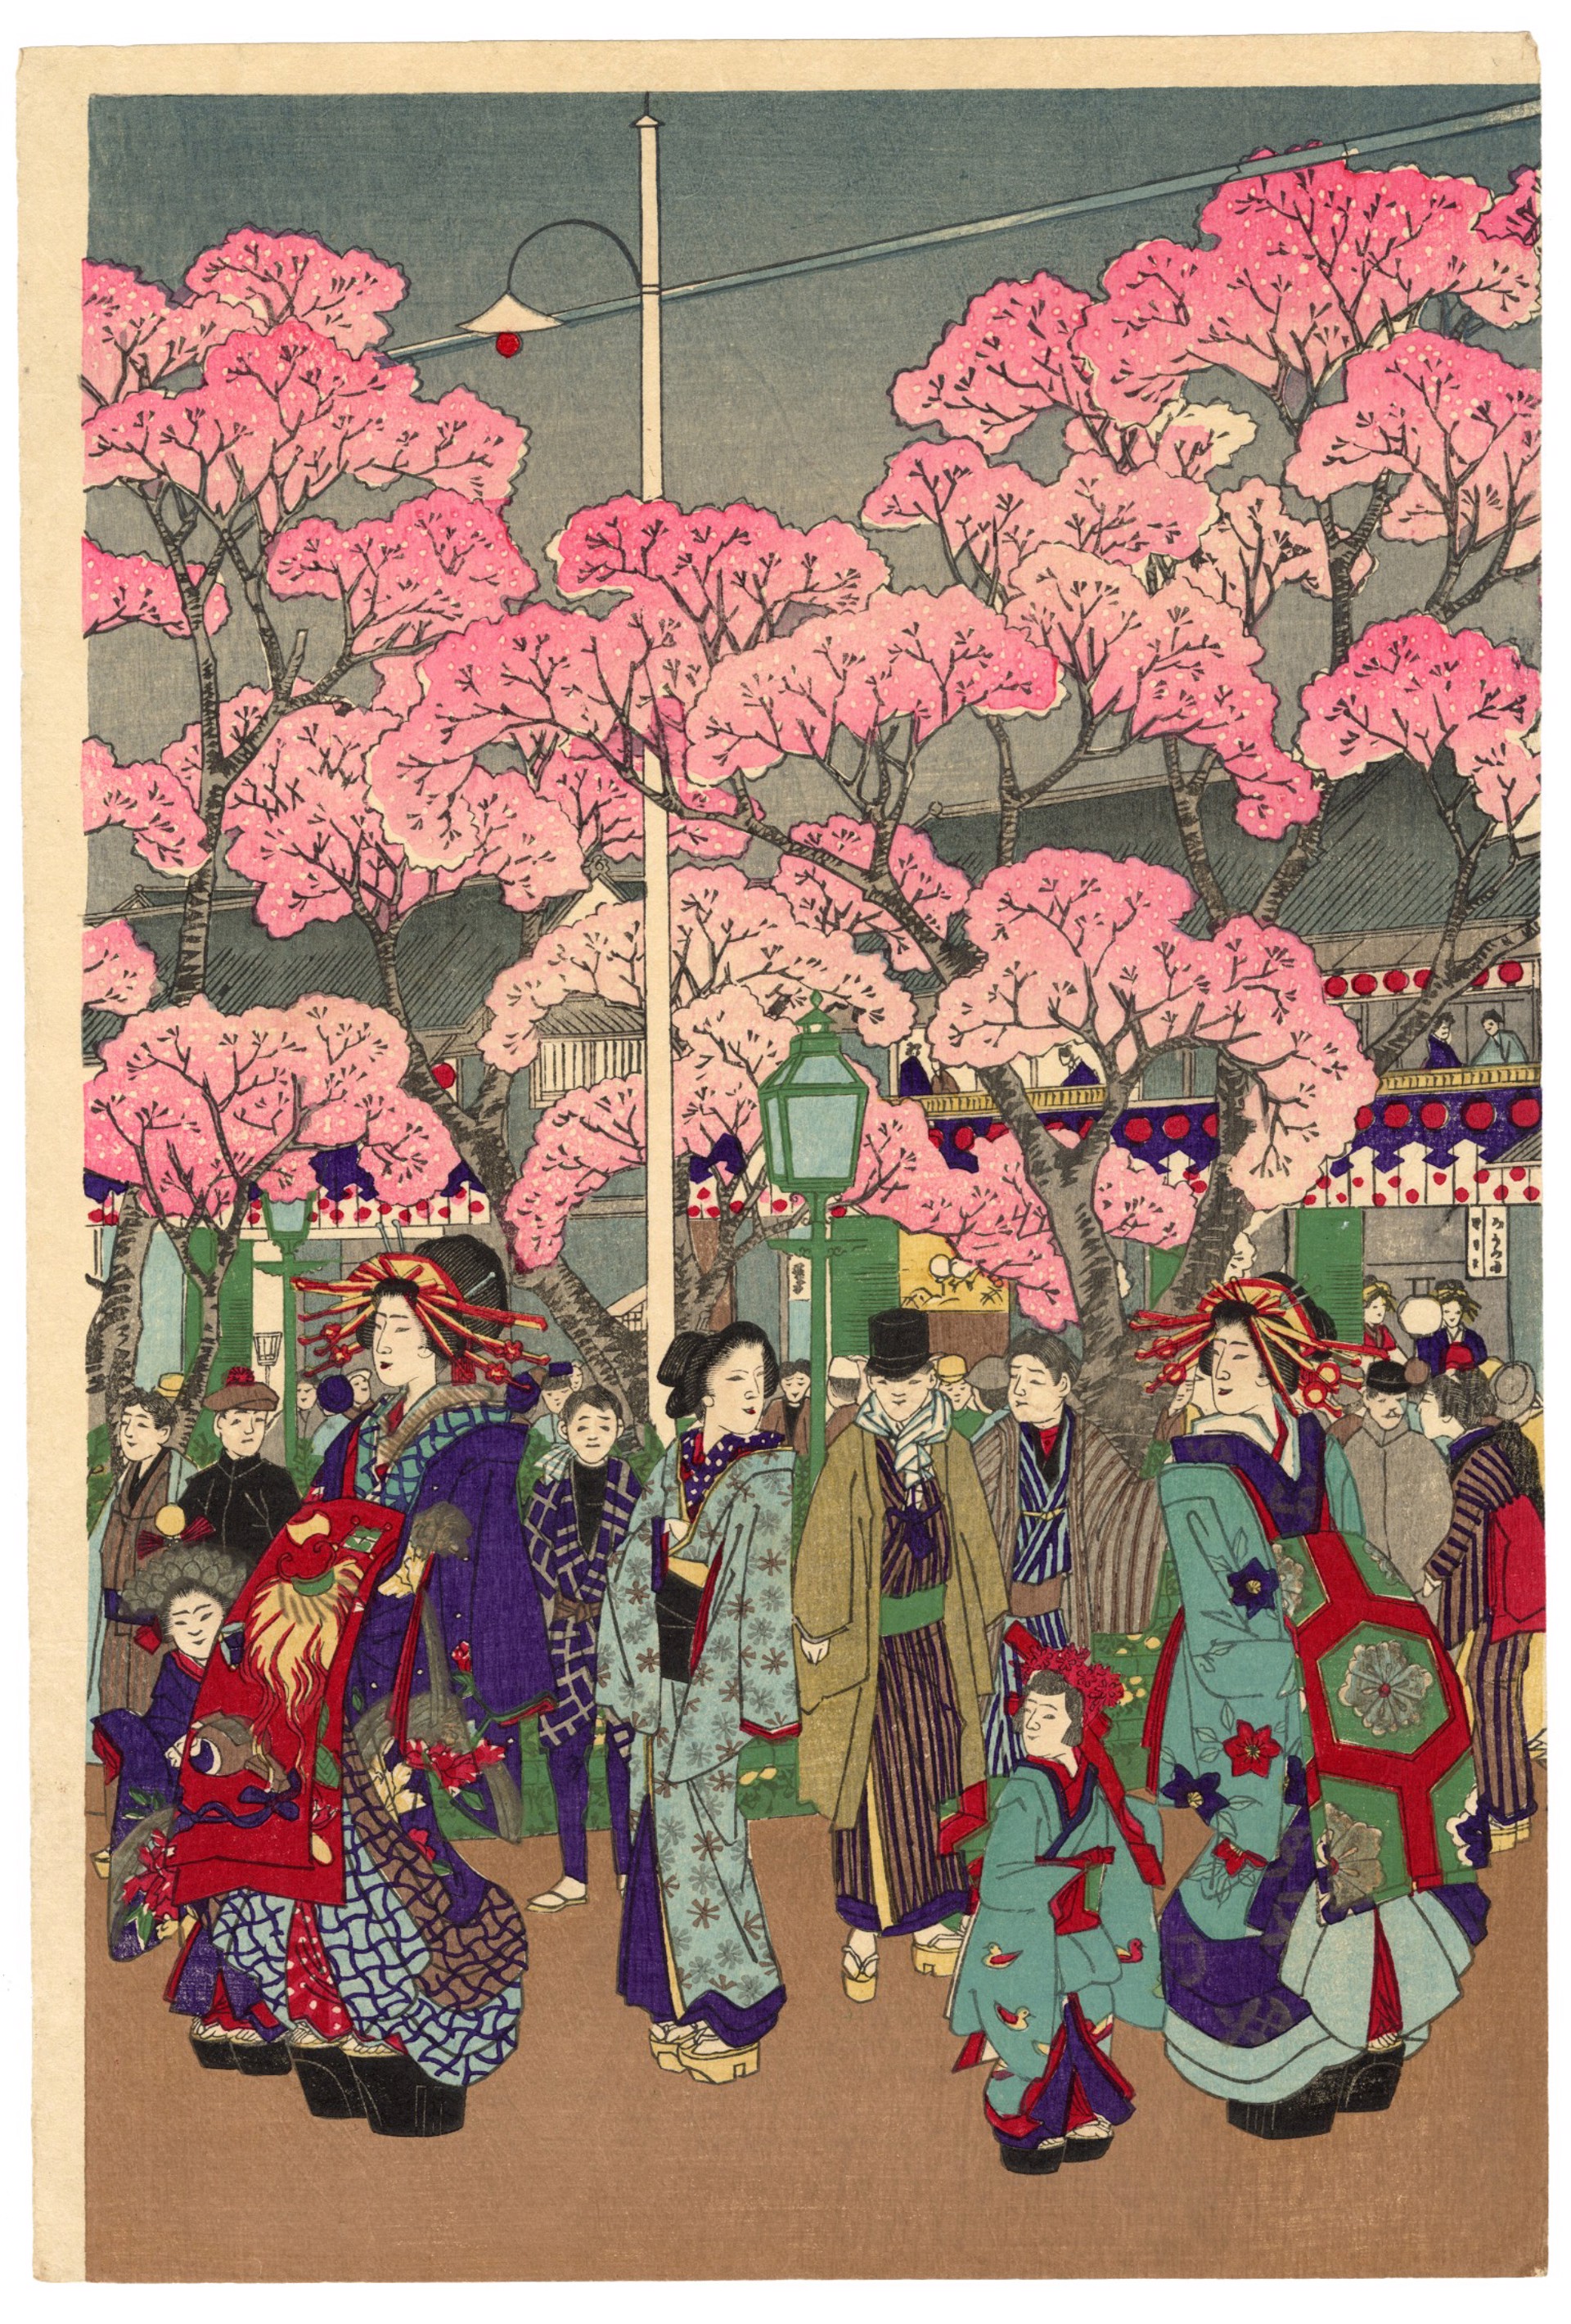 Cherry Blossoms in Full Bloom at Naka-no-cho in the New Yoshiwara by Ikuhide